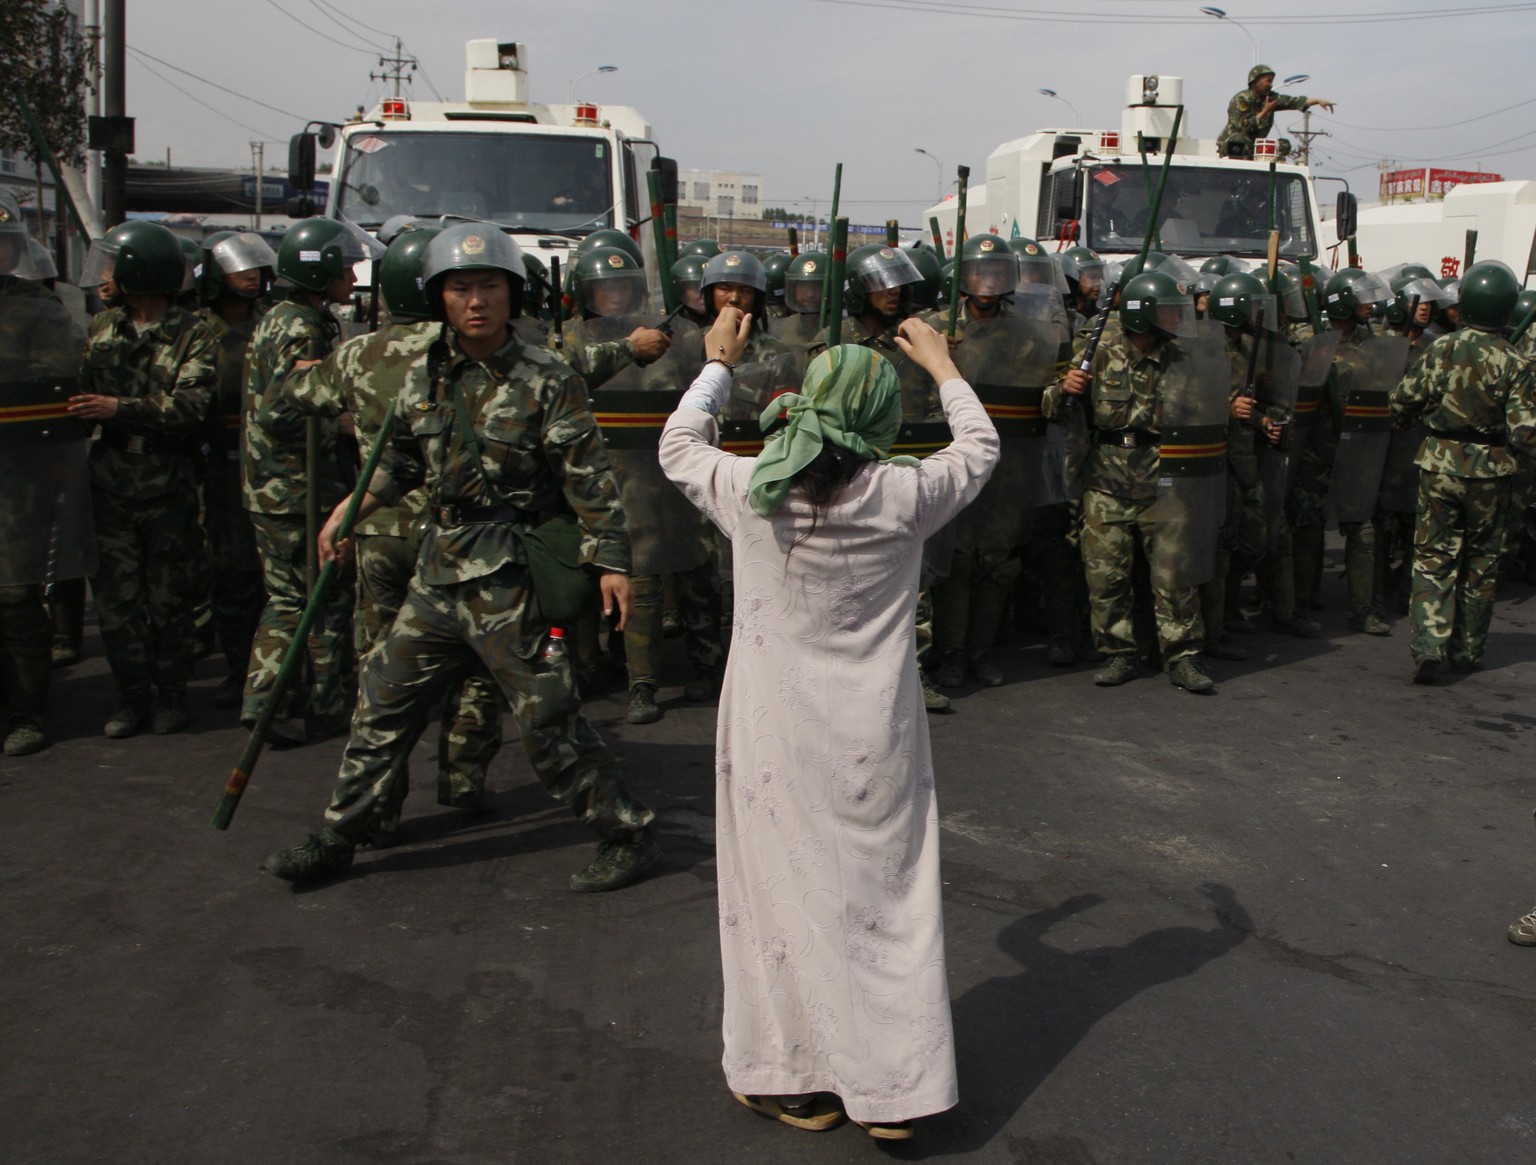 In this photo taken Tuesday, July 7, 2009, a Uighur woman protests before a group of paramilitary police when journalists visited the area in the aftermath of riots in Urumqi in western China&#039;s X ...